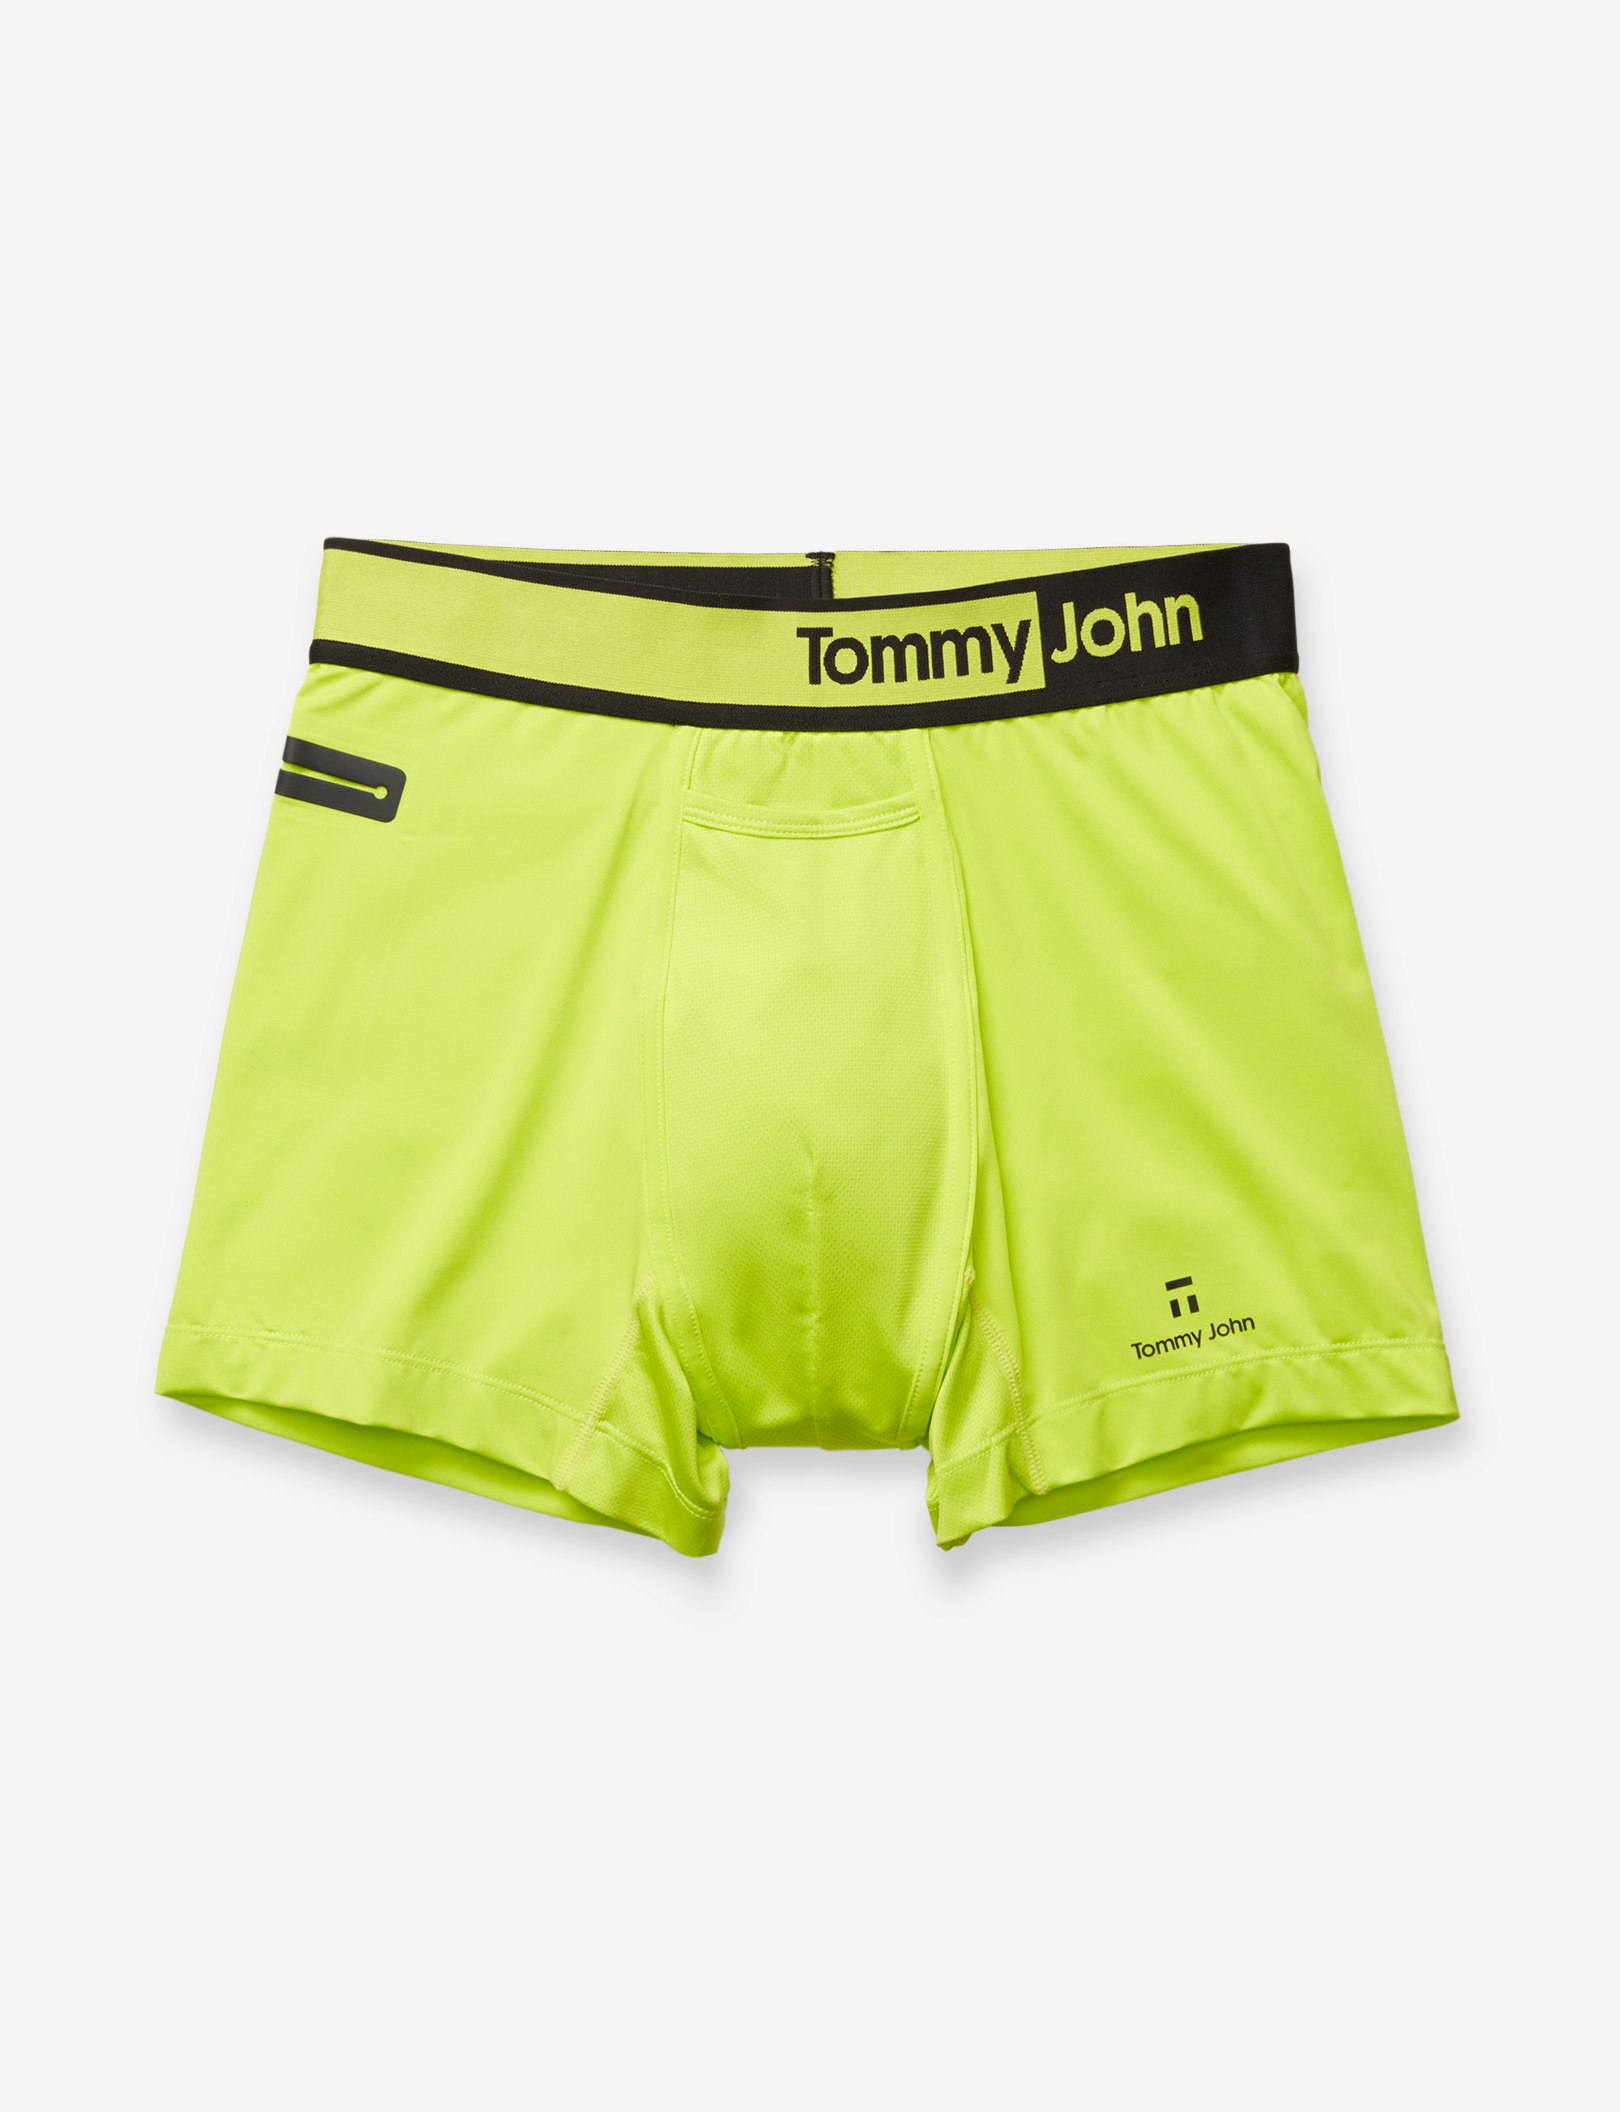 Premium mens undershirts and underwear by Tommy John - Tommy John